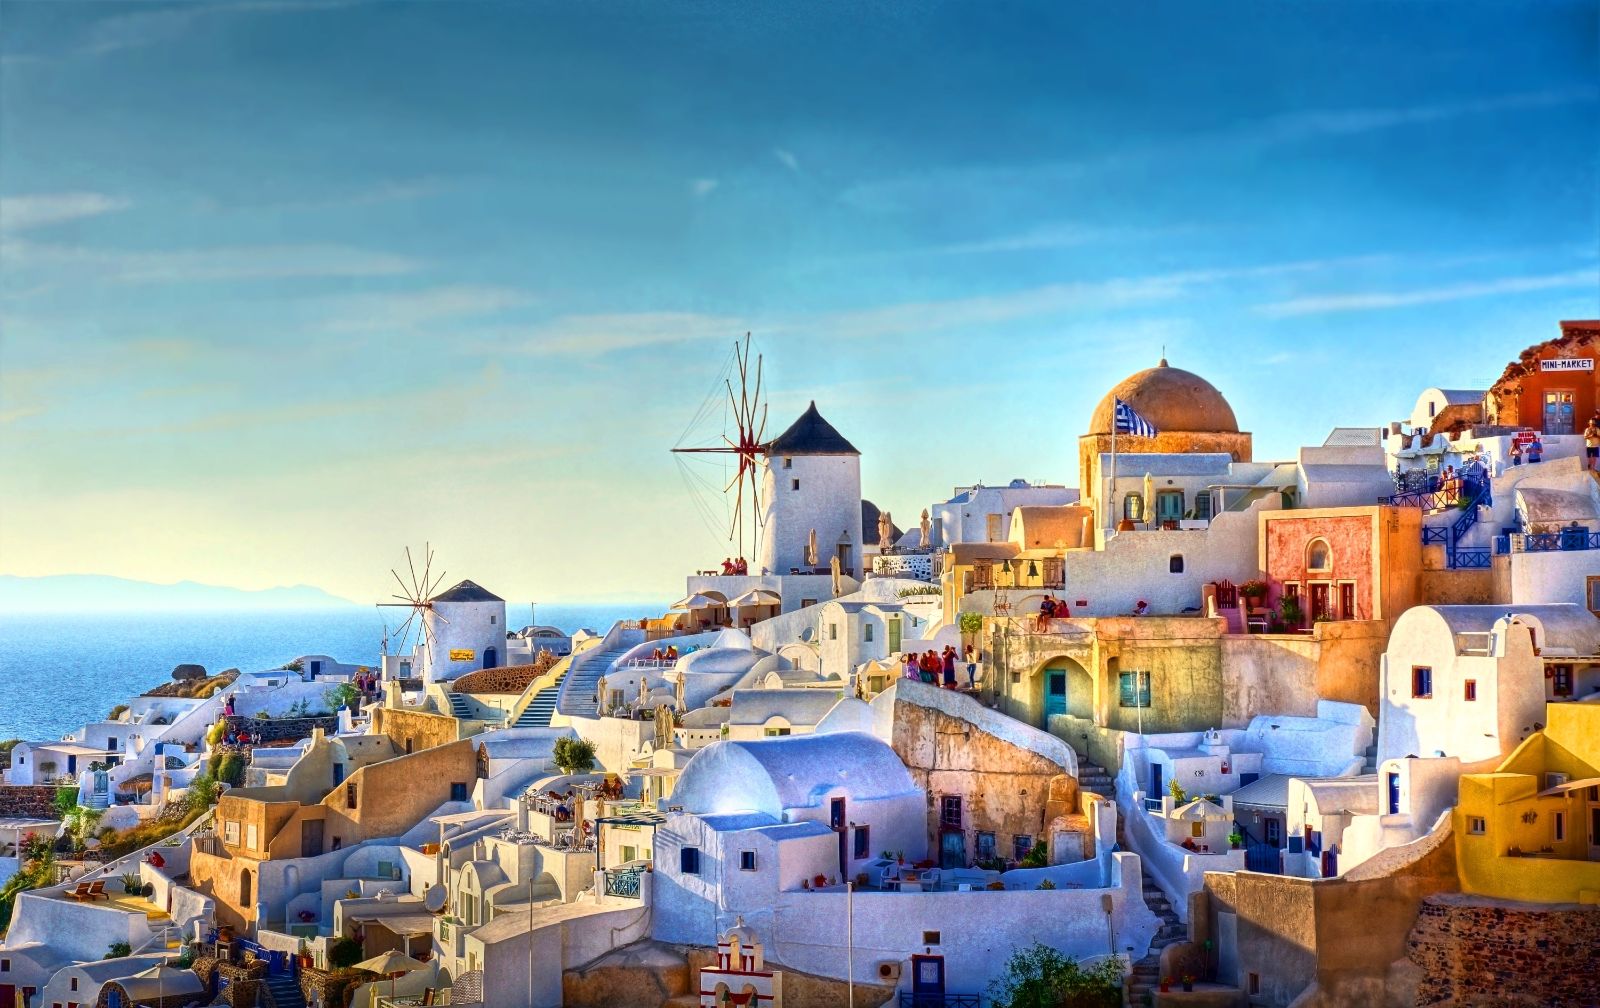 Windmills and colourful rooftops in Oia Santorini